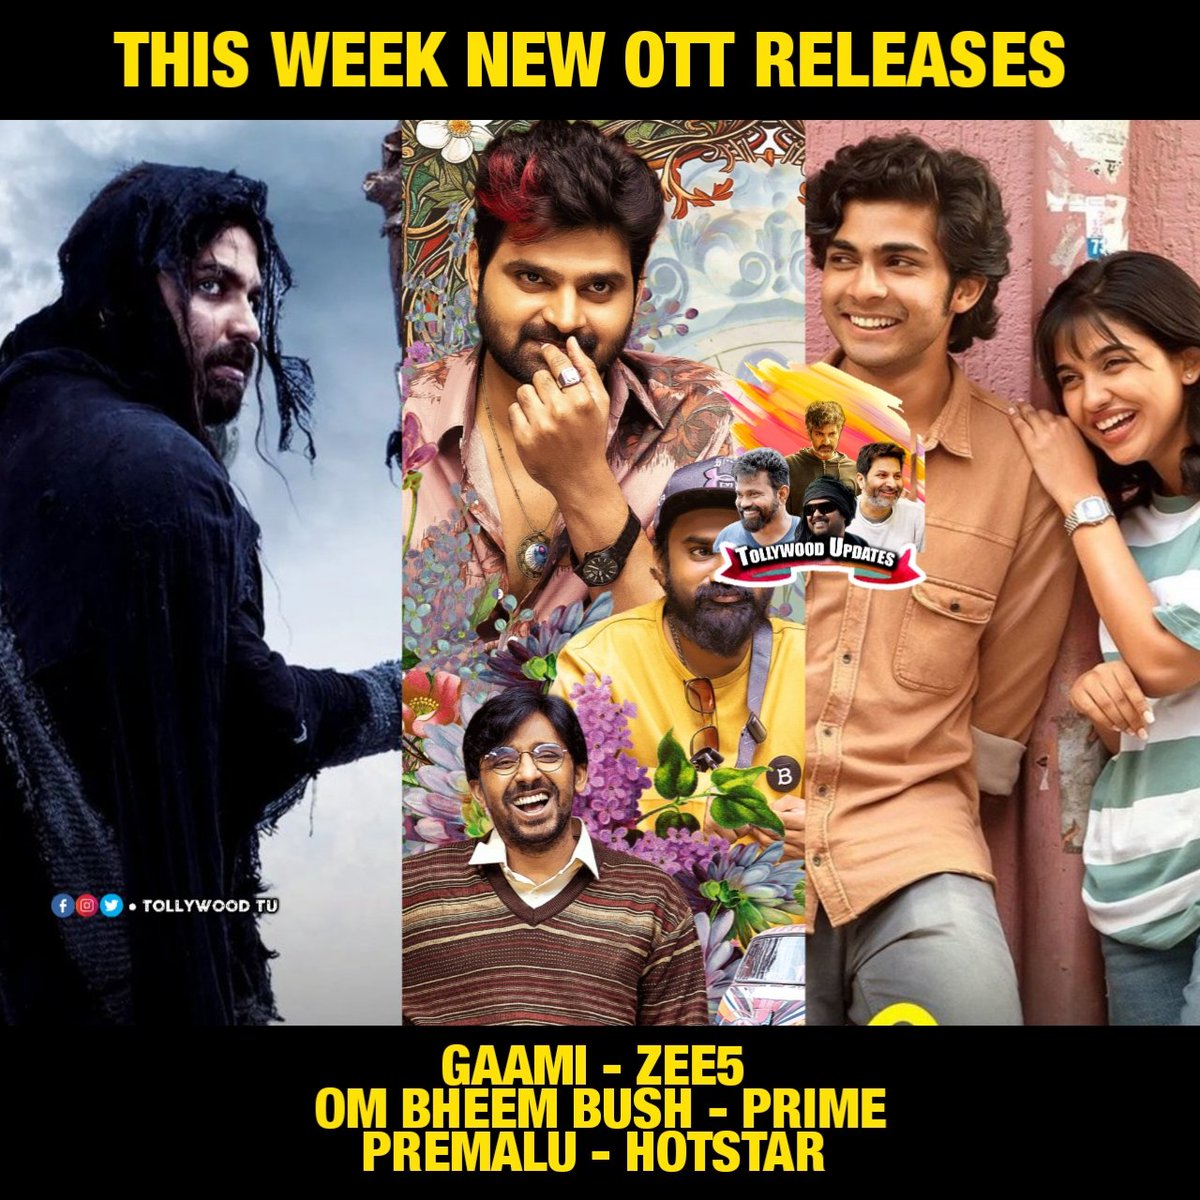 This week OTT releases !! #Gaami - streaming now on #Zee5 #OmBheemBush - streaming now on #PrimeVideo #Premalu Telugu version available in #aha and other languages available in #Hotstar.